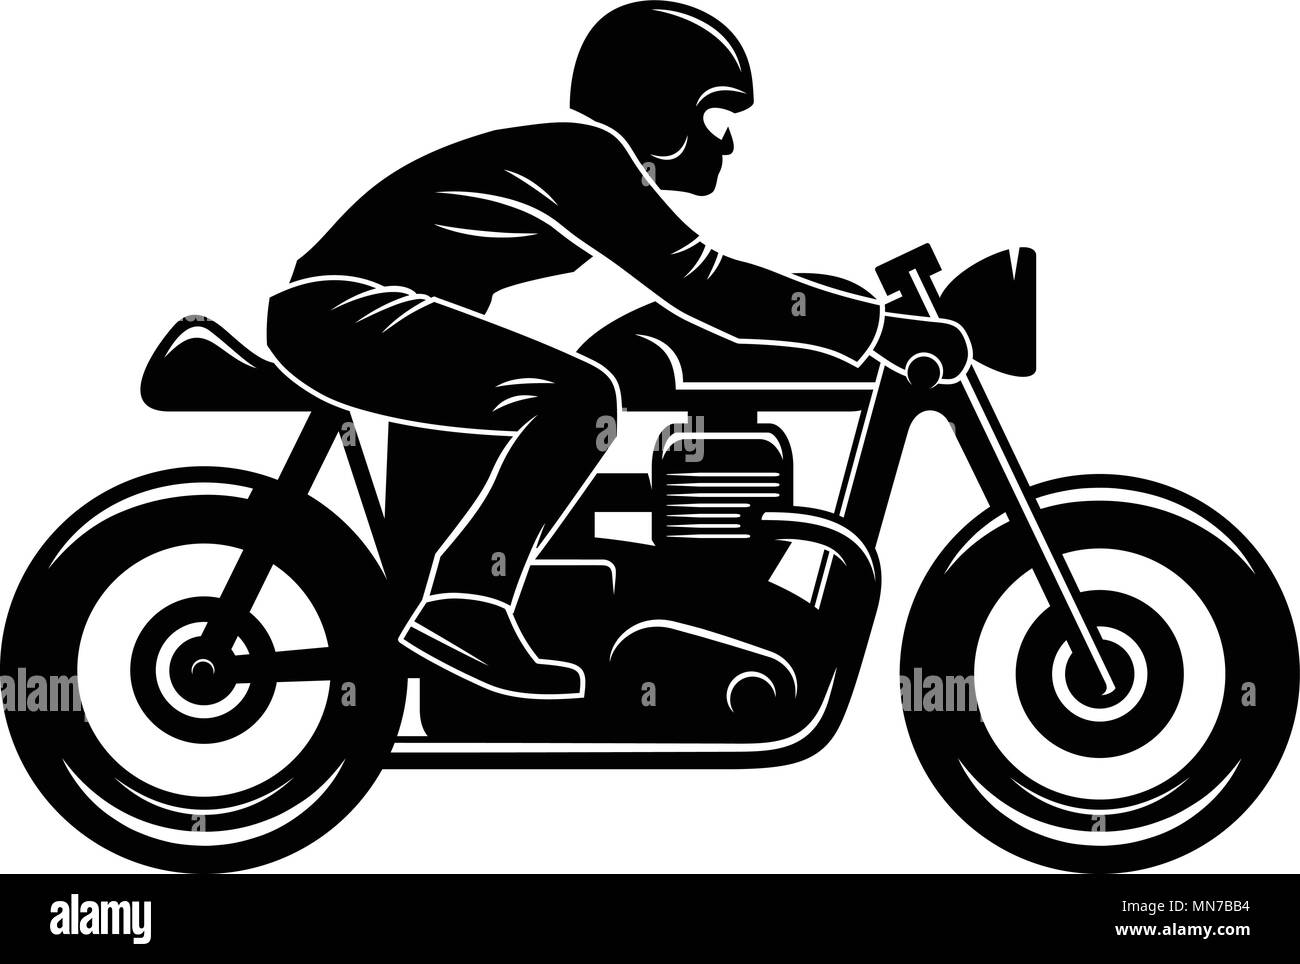 Racing Motorcycle Clipart Black And White